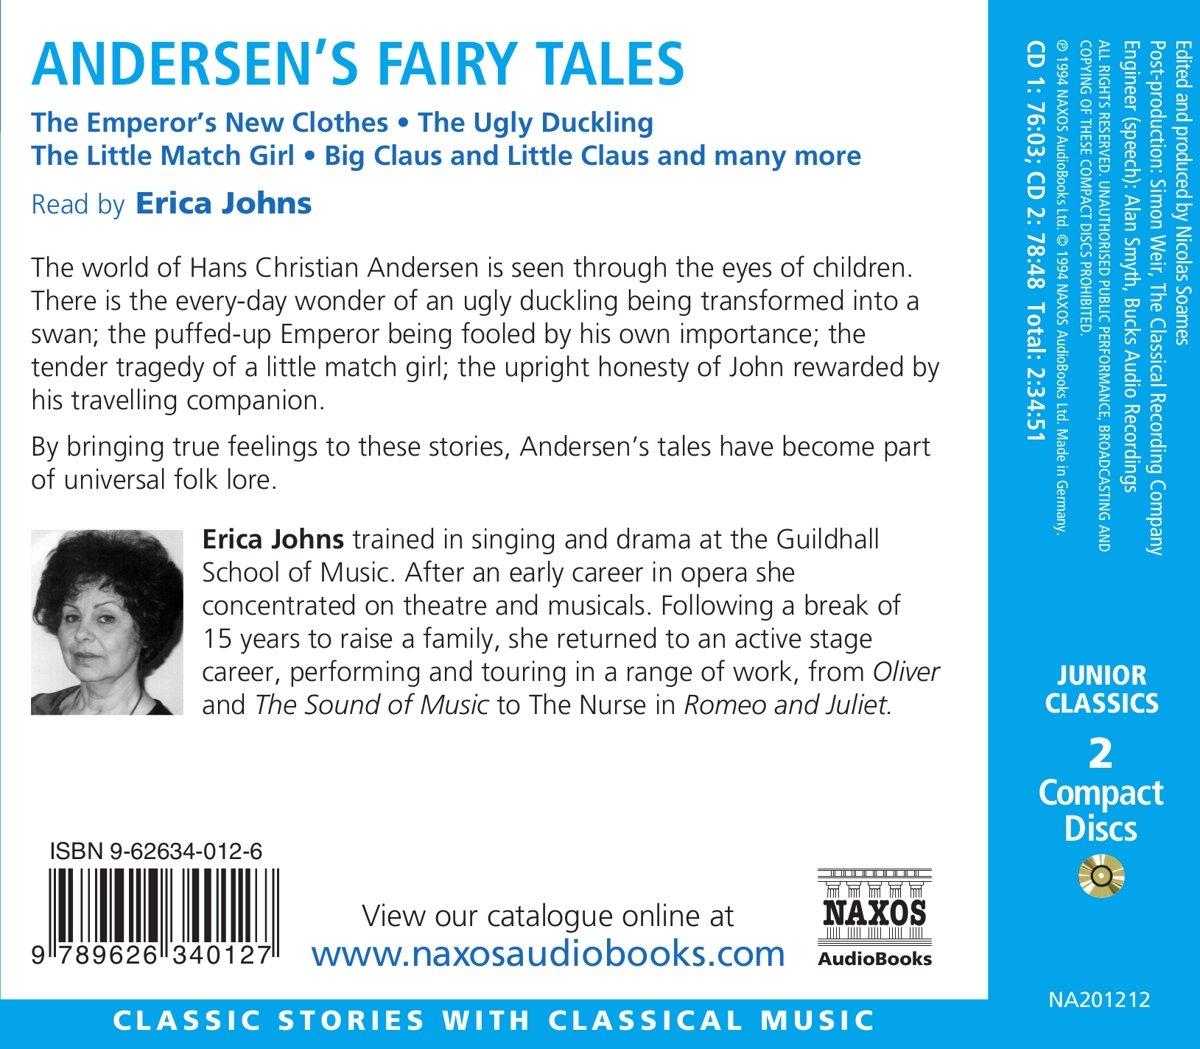 Andersen's Fairy Tales: The Ugly Duckling, The Emperor's New Clothes, etc. (Children's Classics) - slide-1